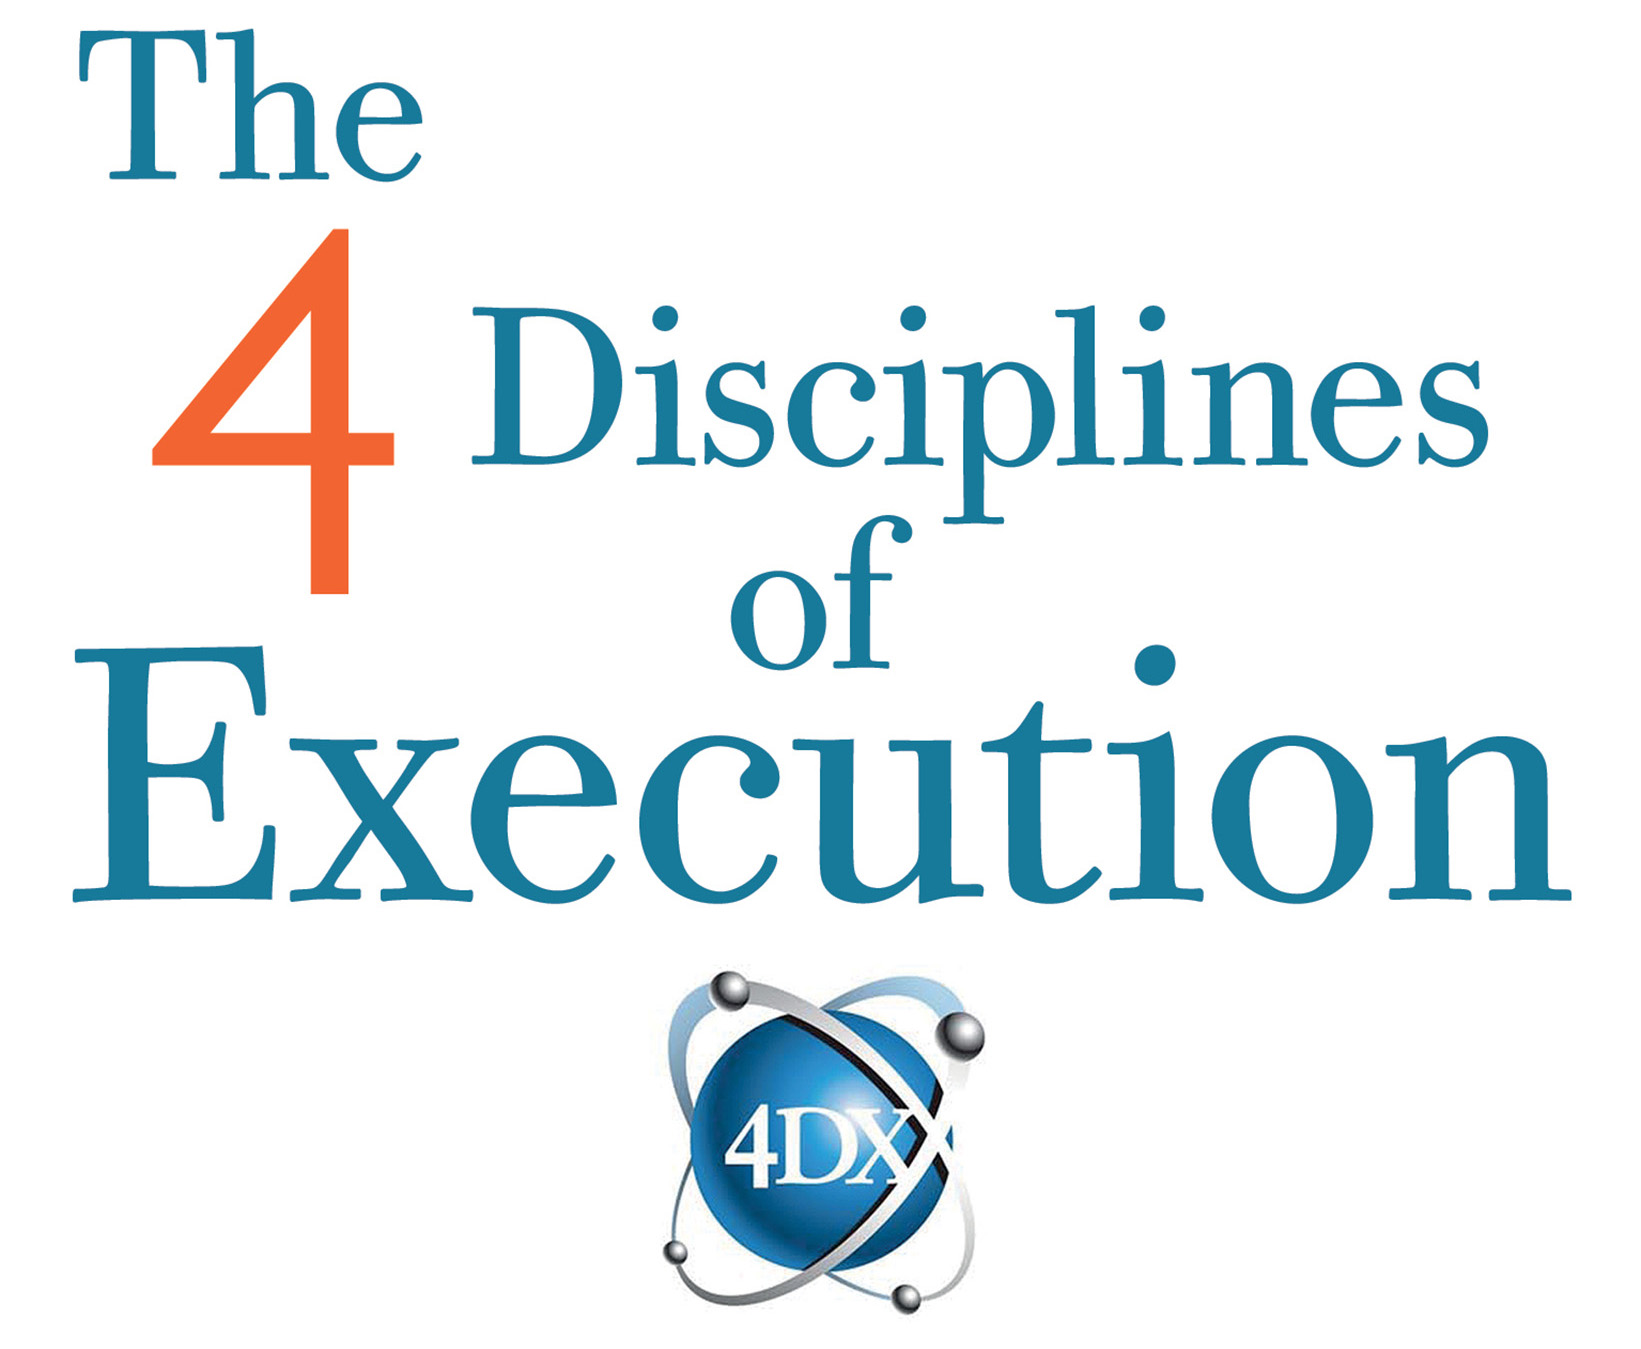 THE 4 DISCIPLINES OF EXECUTION